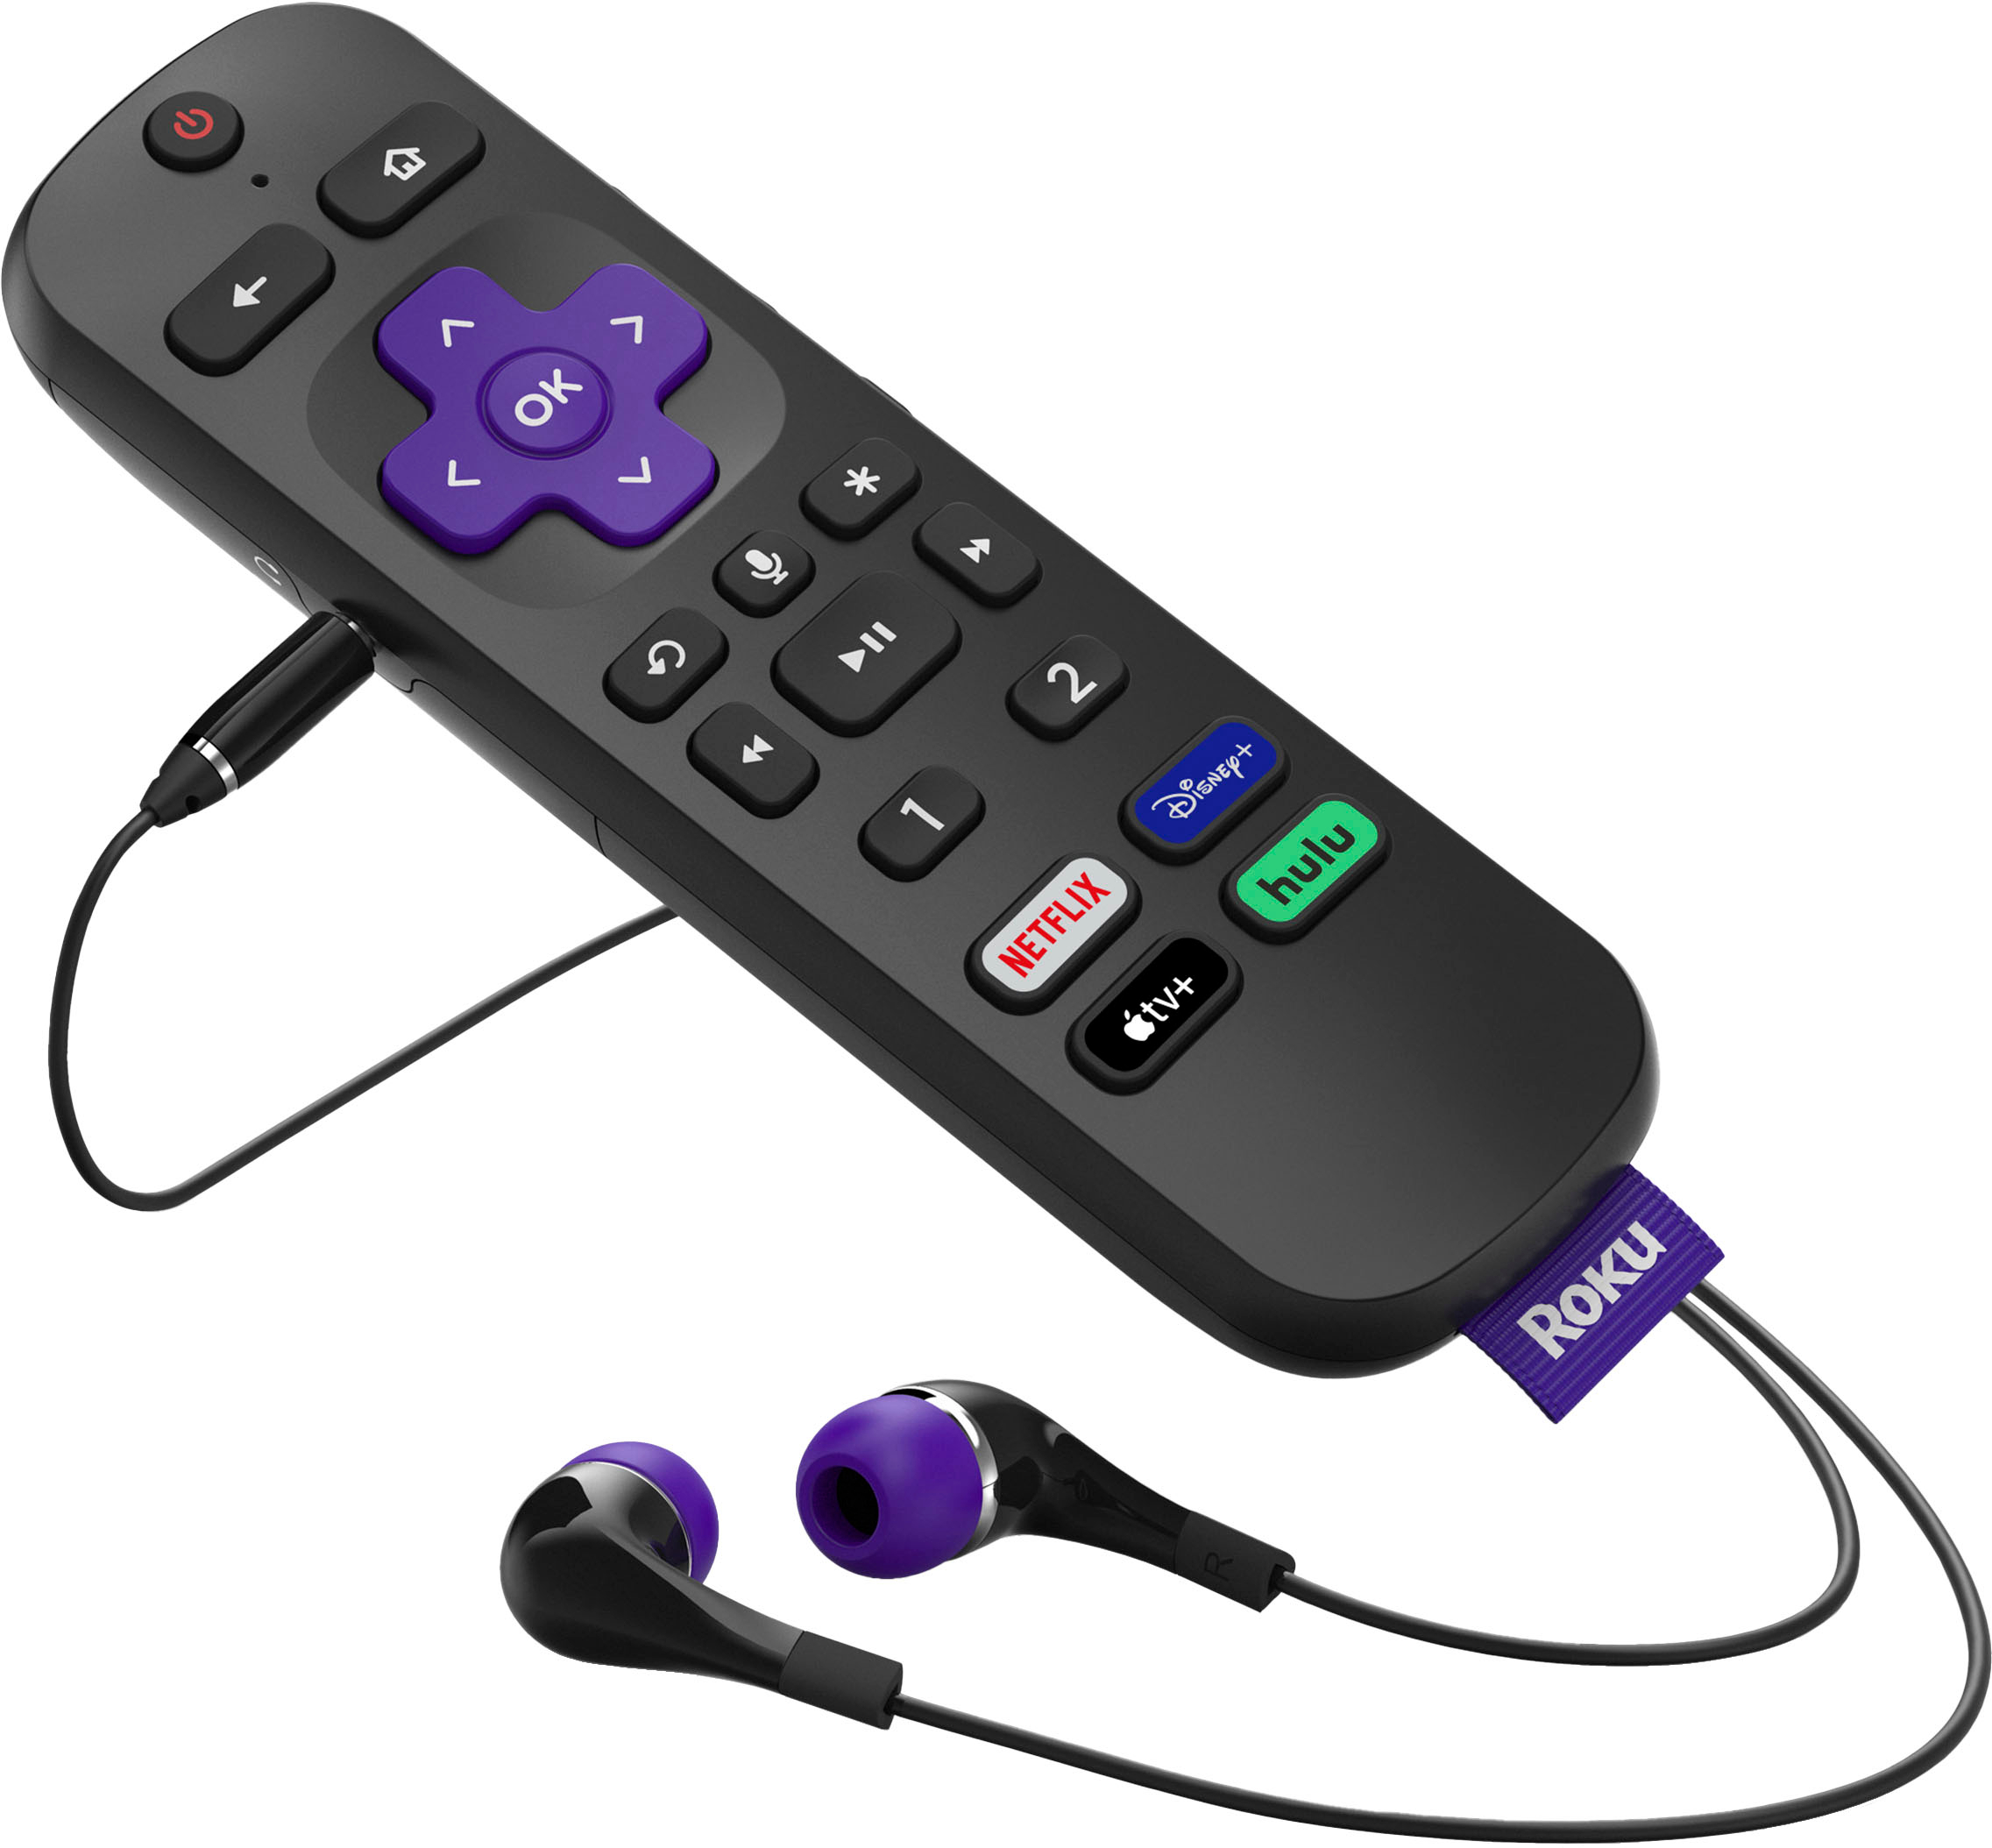 Roku Ultra 4K/HDR/Dolby Vision Streaming Device and Roku Voice